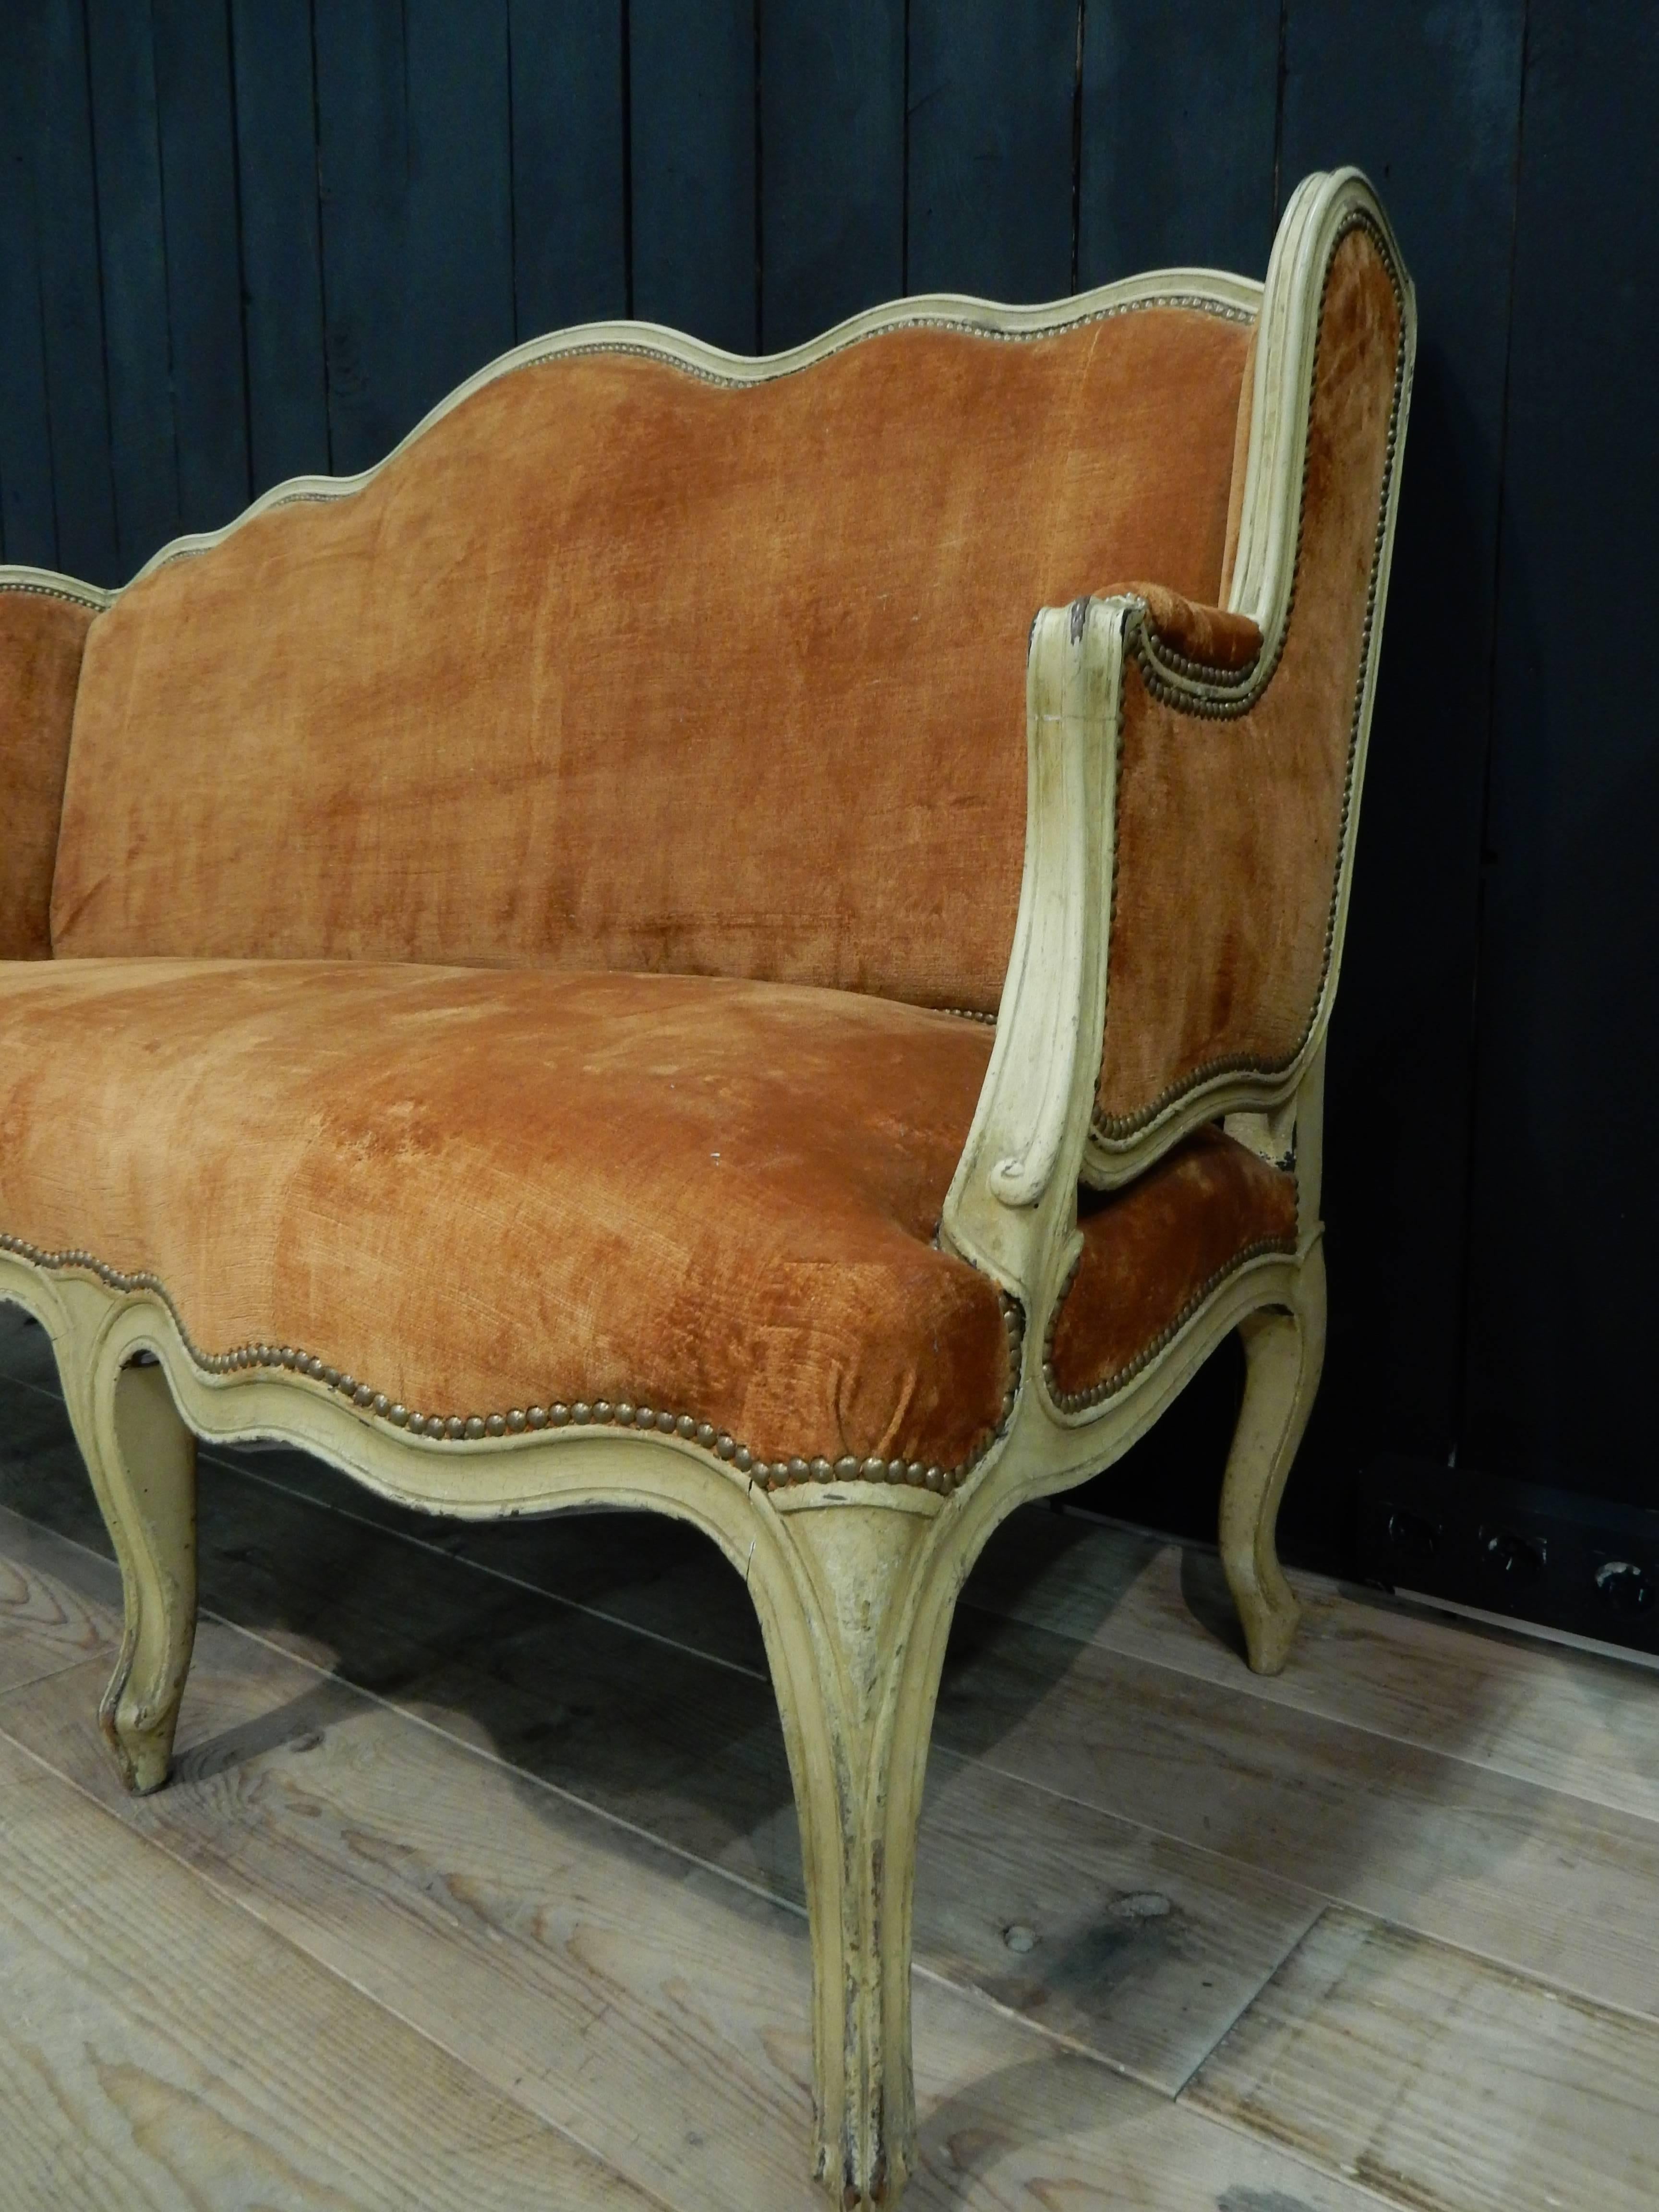 A very chic sofa Louis XV style (1850 period) with a 1960 ré-upholstery attribued by Maison Jansen:splendid velvet coral
all in very good condition, the structure is from 1850 and upholstery from 1960.